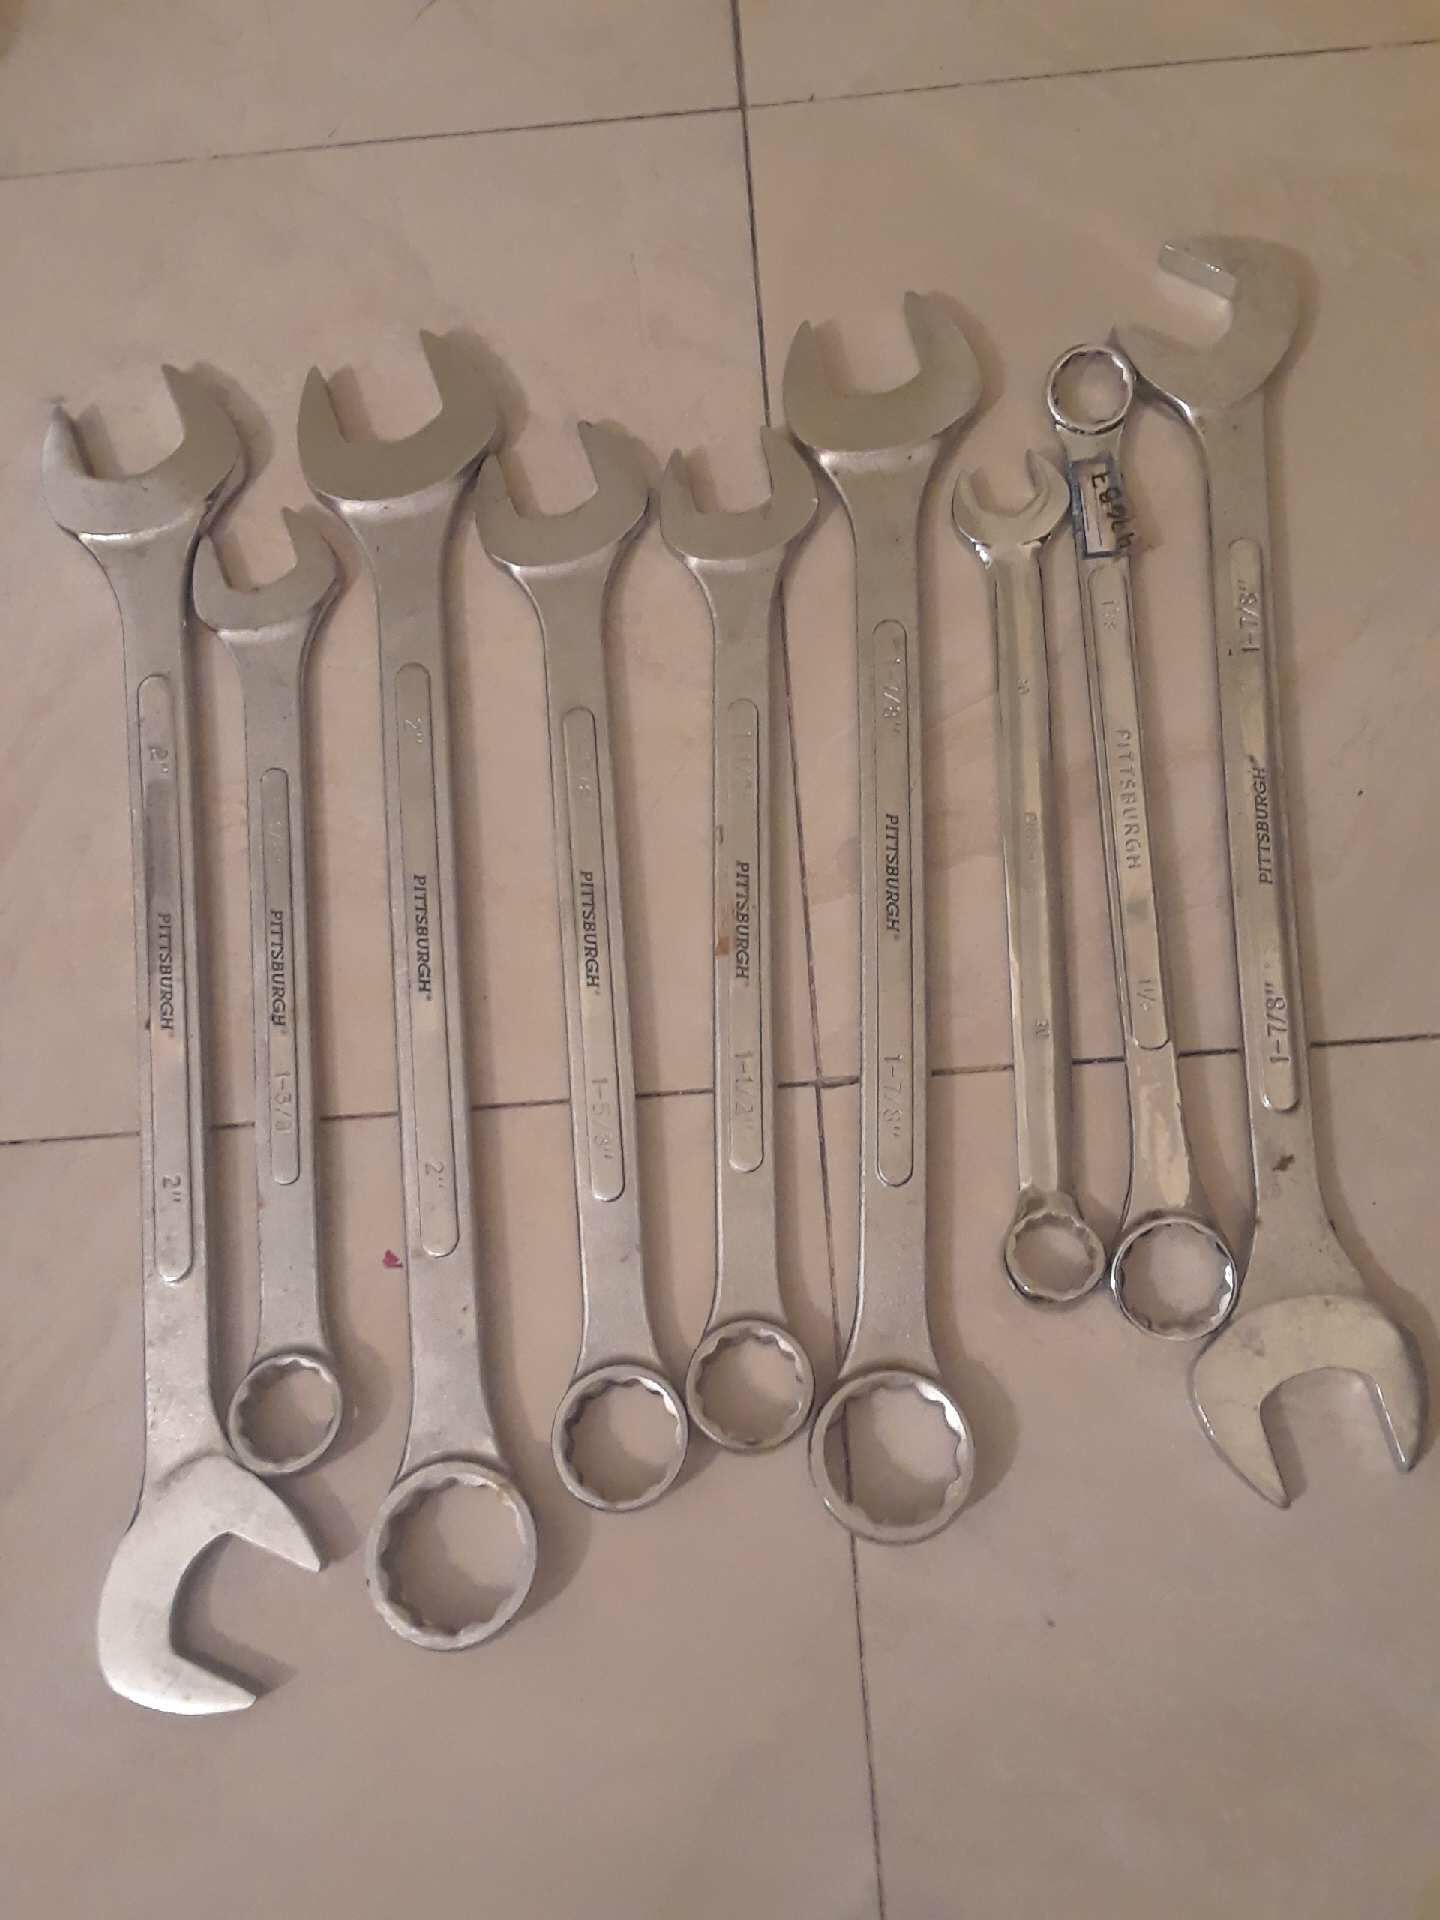 Big wrenches